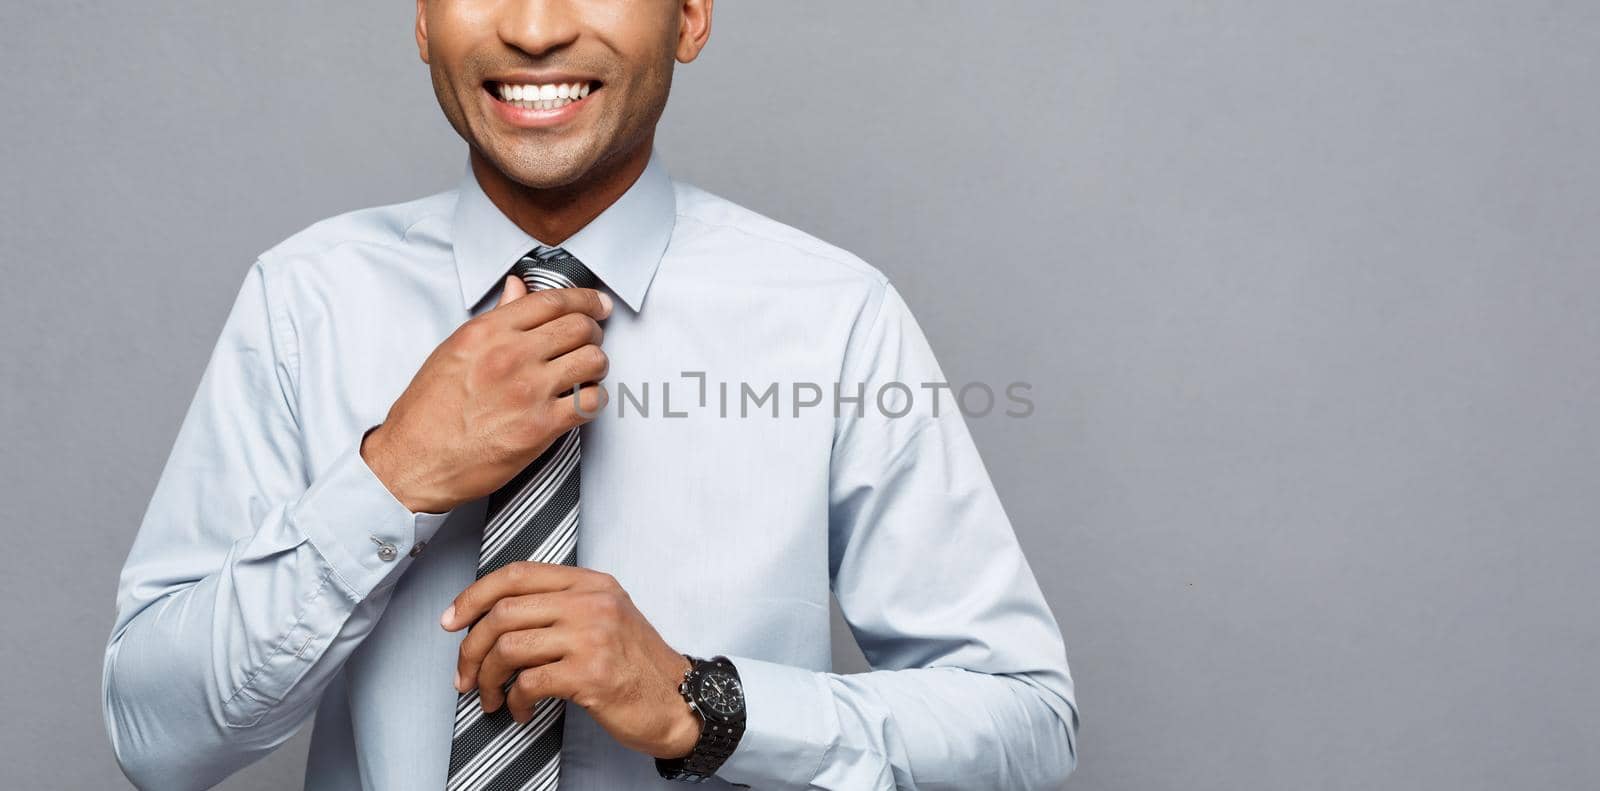 Business Concept - Happy confident professional african american businessman posing over grey background